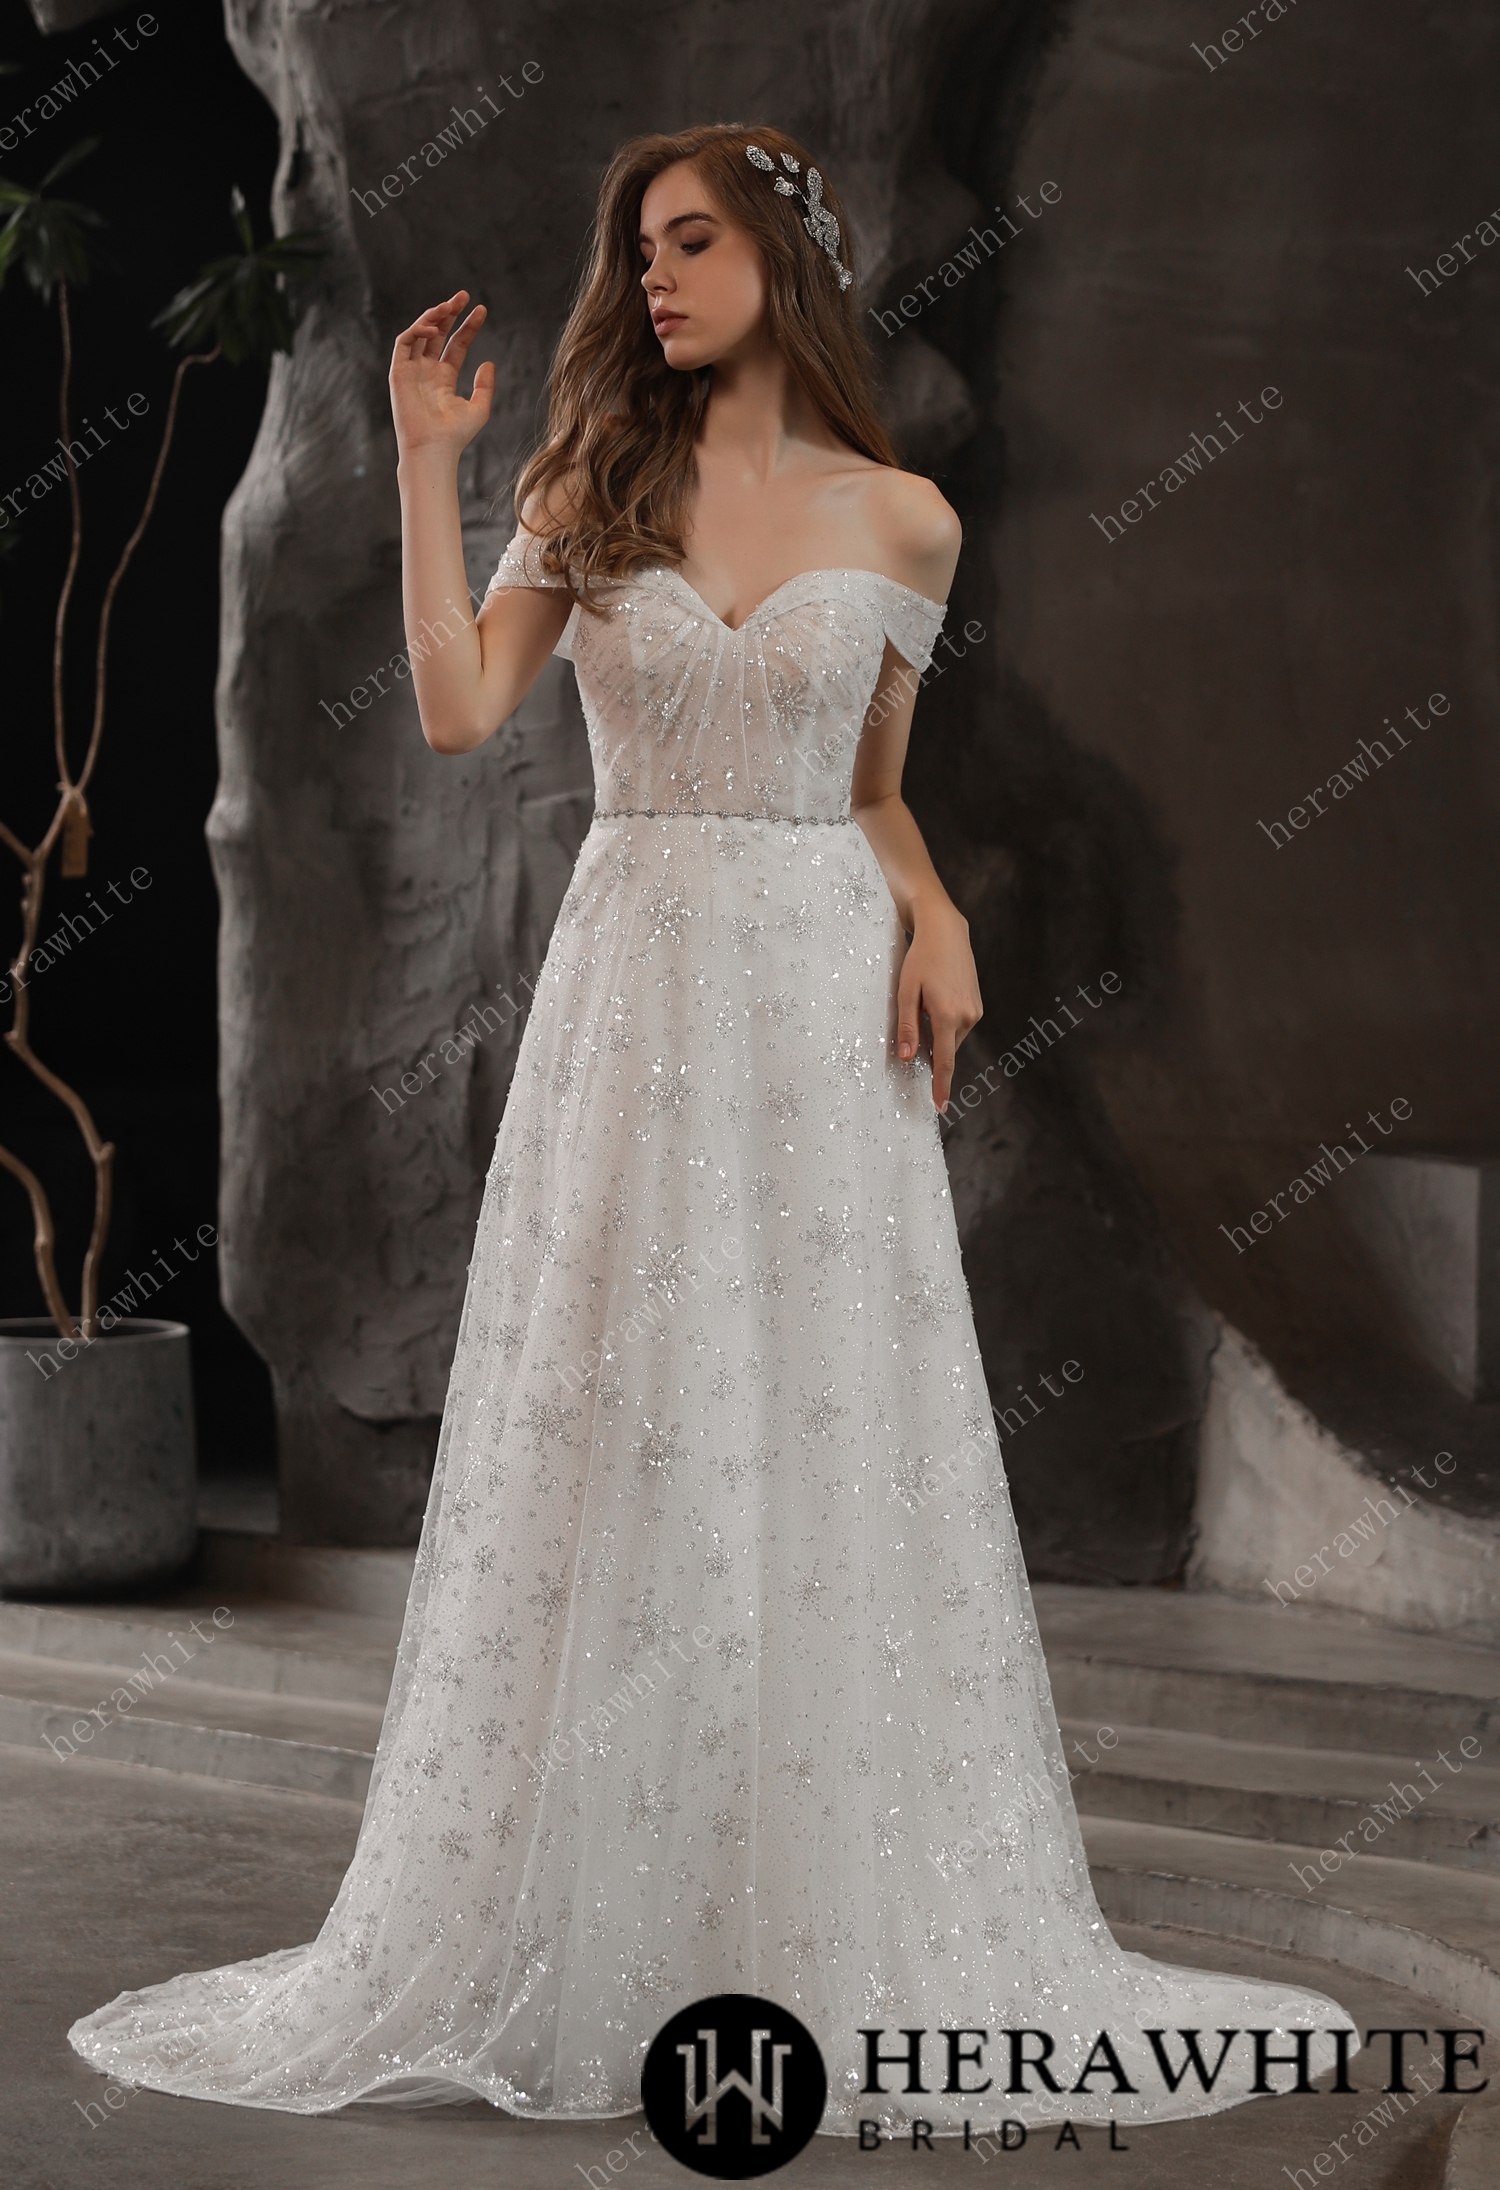 Sparkly Beaded Lace A-Line Off the Shoulder Wedding Dress